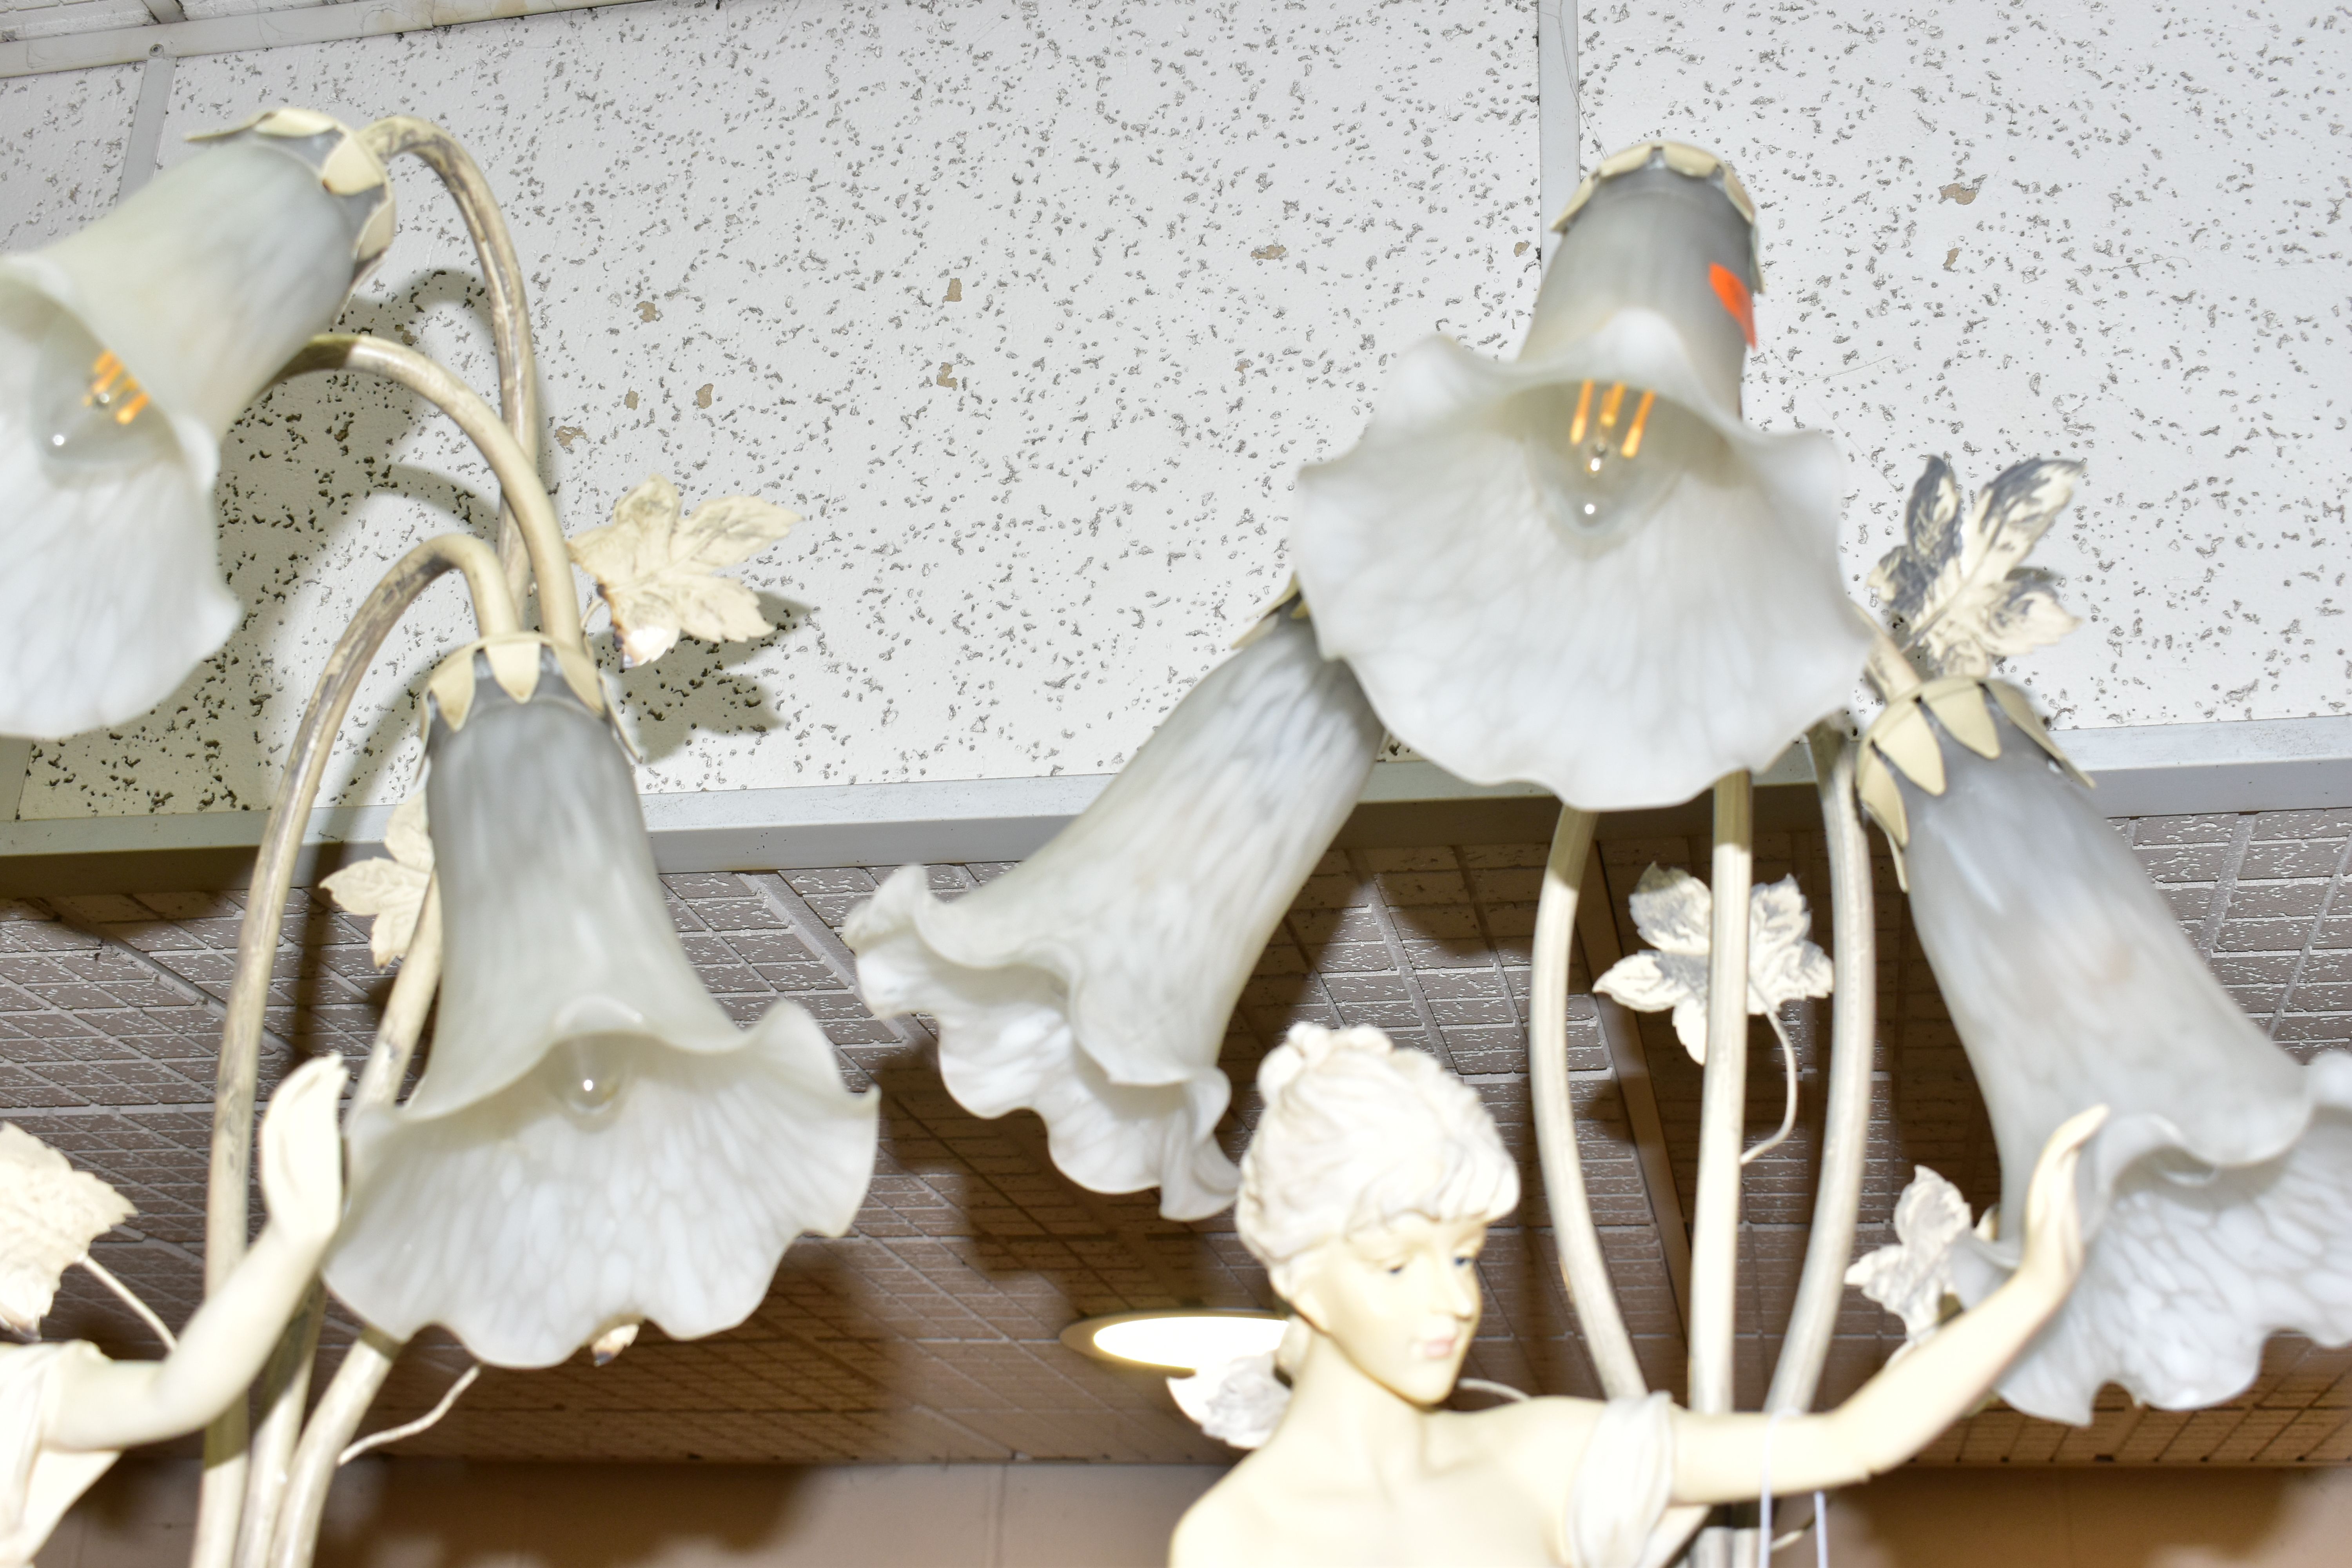 A PAIR OF FIGURAL TABLE LAMPS, three mottled white glass shades on each lamp in the form of flowers, - Image 10 of 10